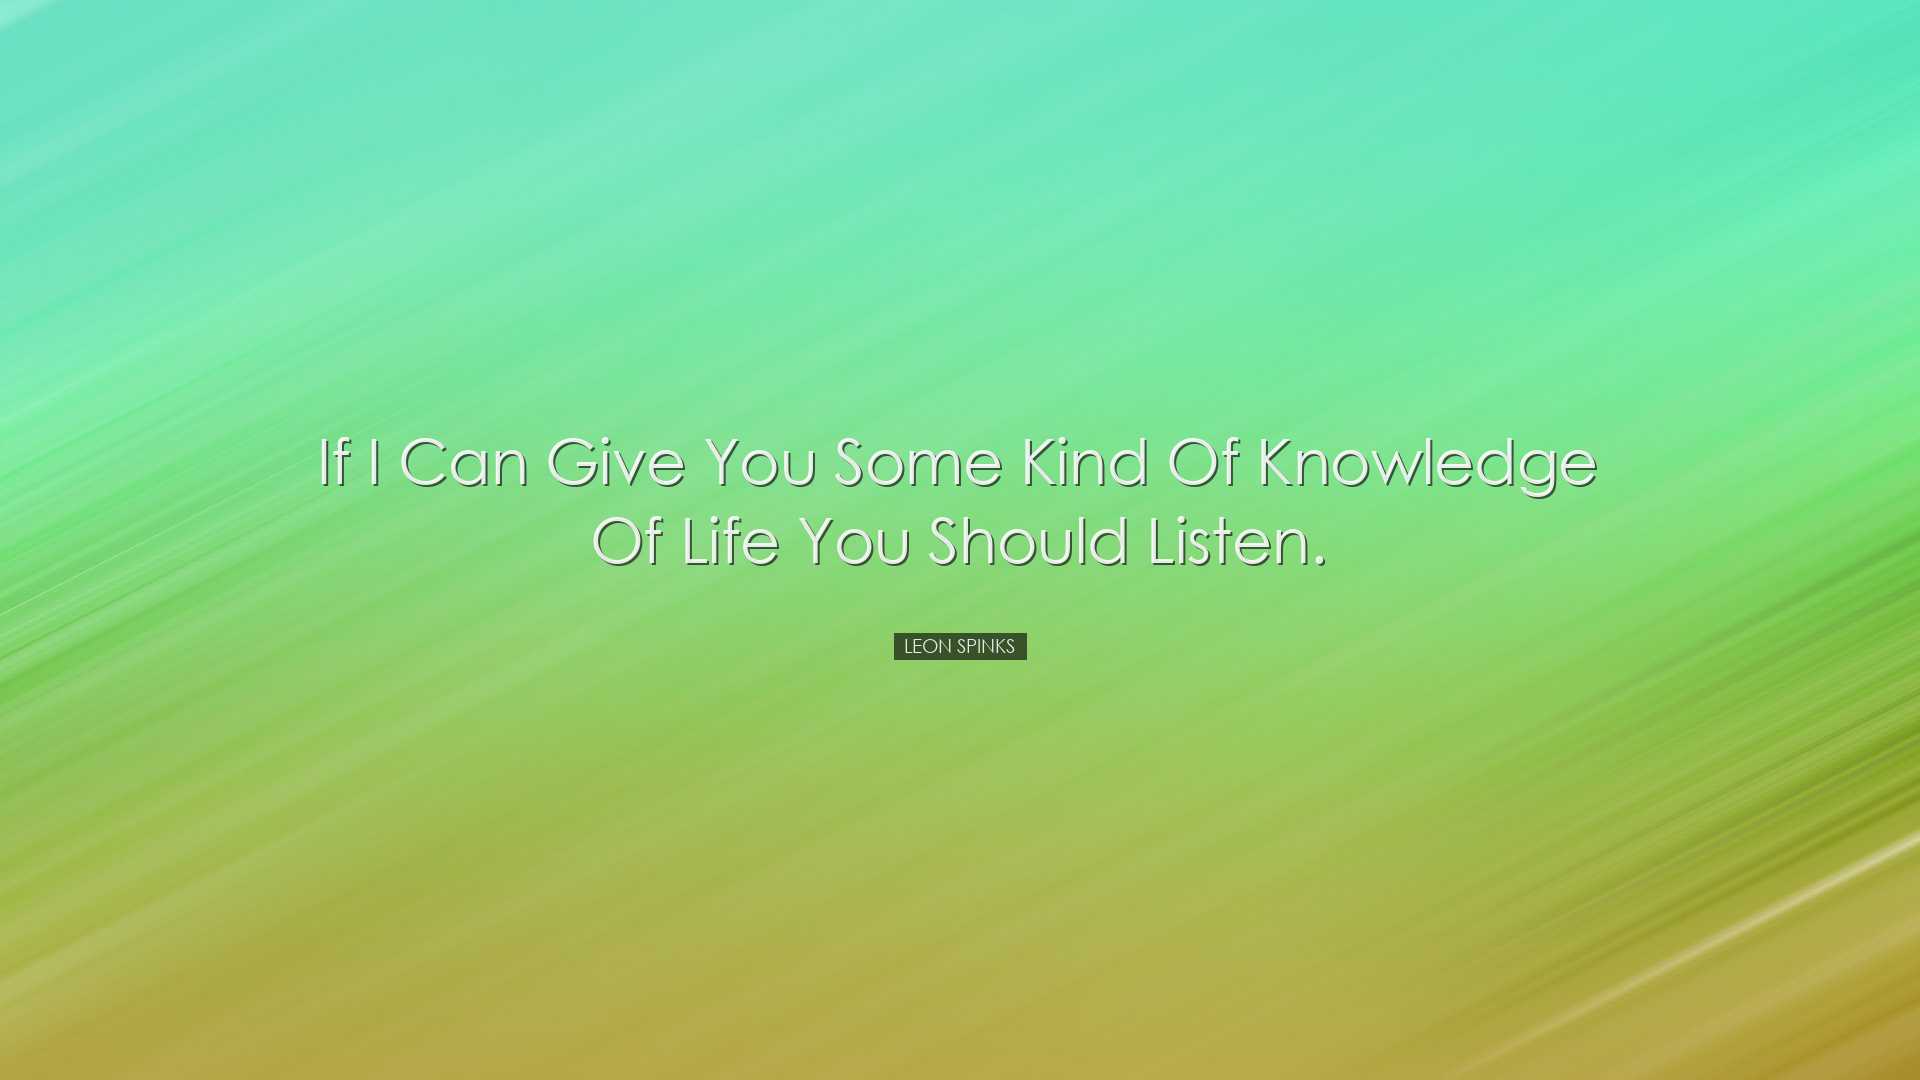 If I can give you some kind of knowledge of life you should listen